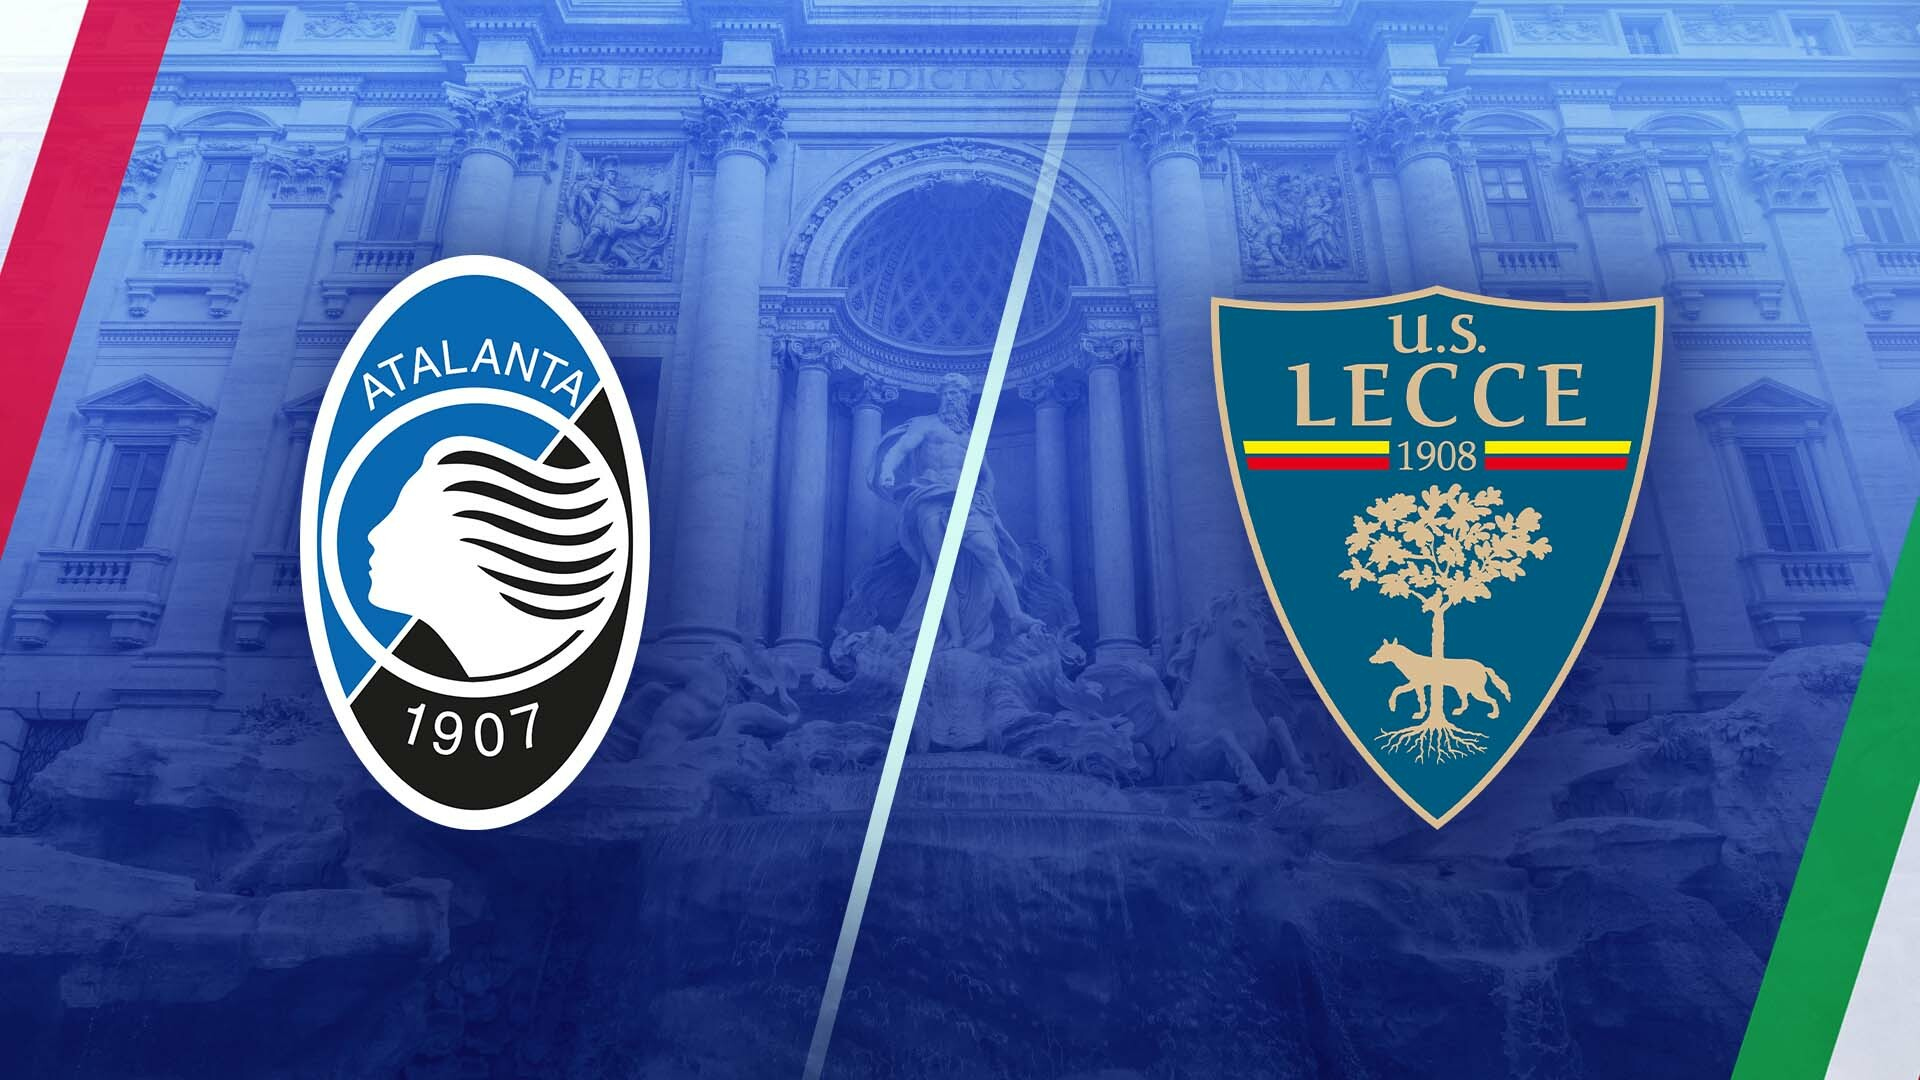 Watch Serie A: Atalanta vs. Lecce - Full show on Paramount Plus